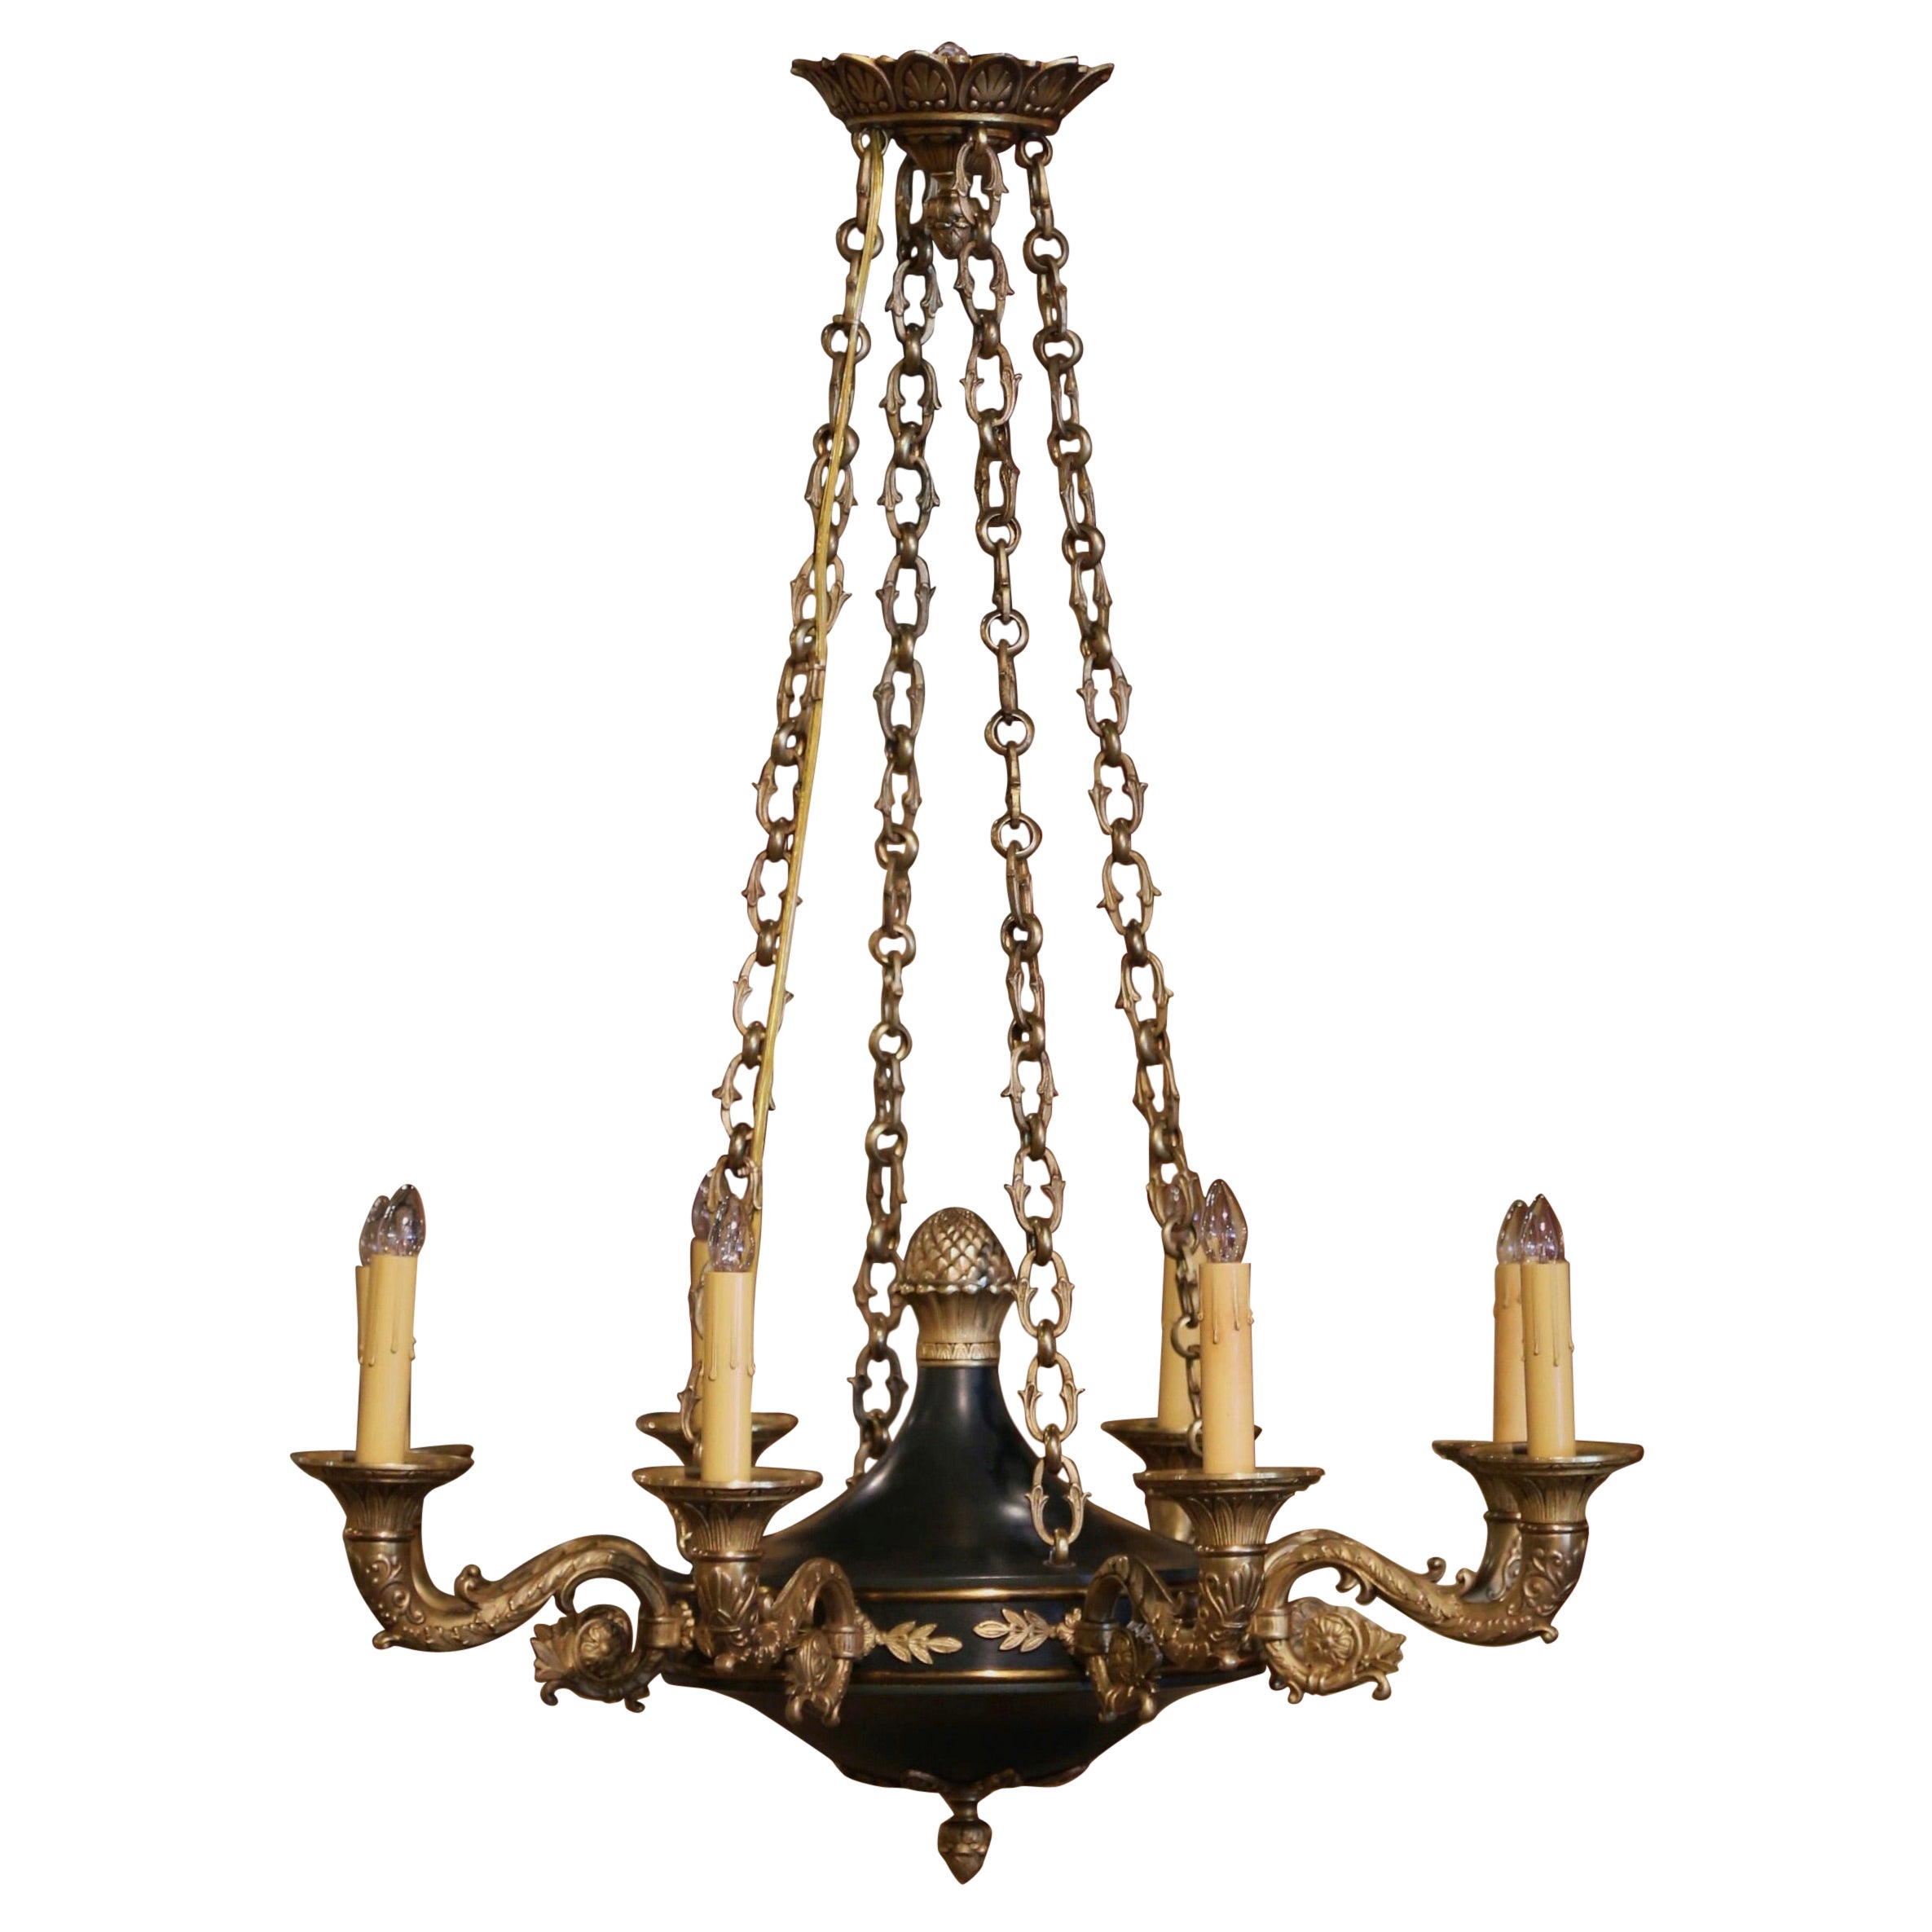 Early 20th Century French Empire Bronze Dore Eight-Light Chandelier For Sale